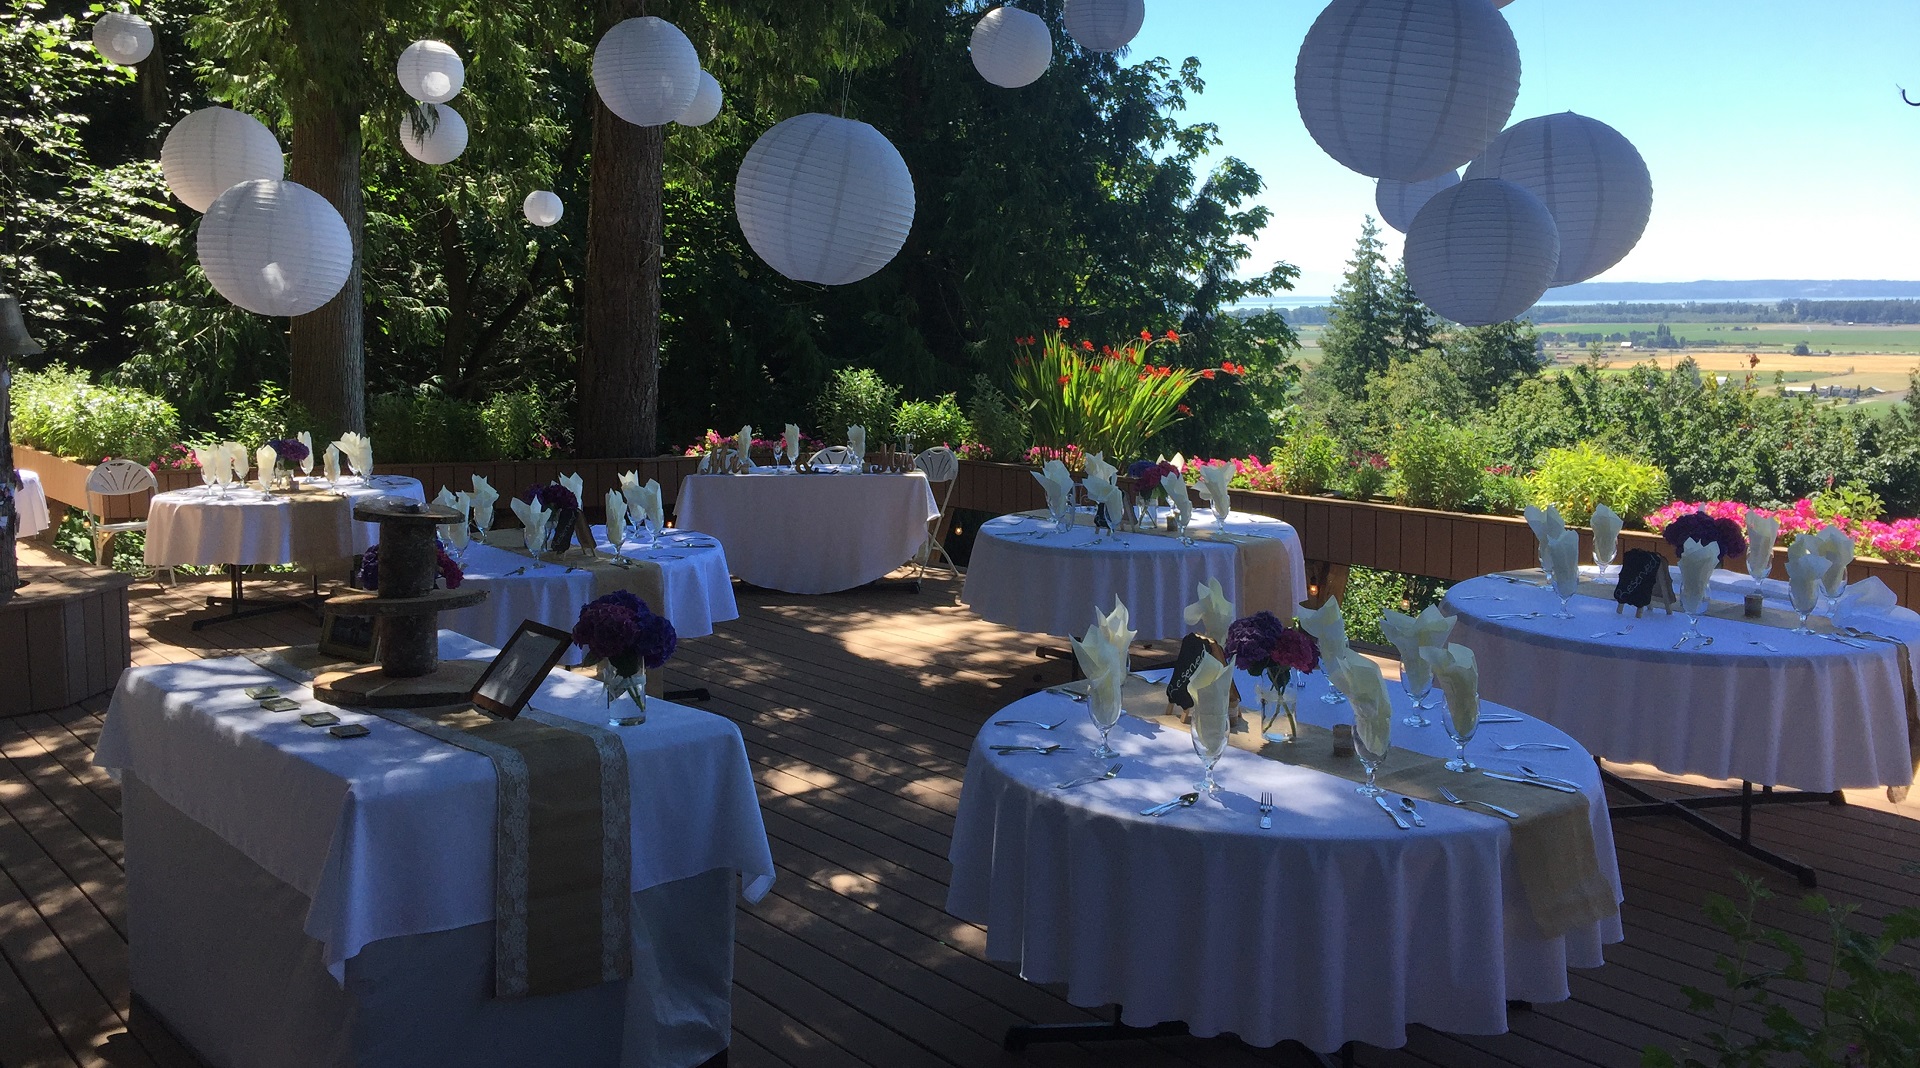 A group of tables with white linen and paper lanterns hanging from the ceiling.